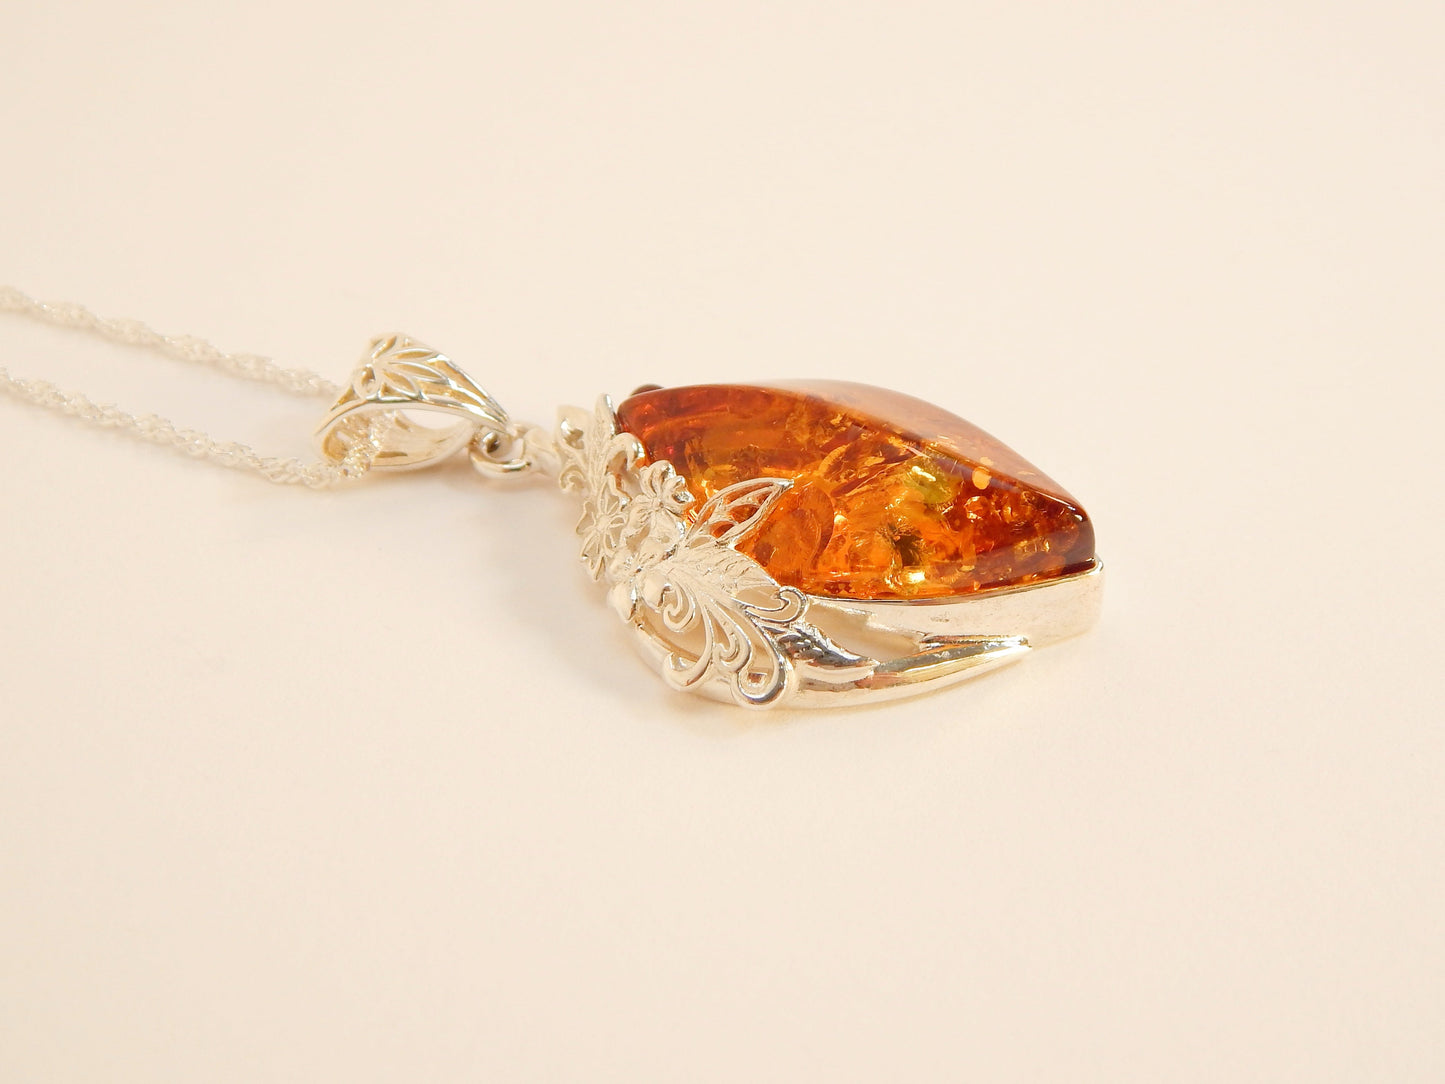 Natural Baltic Cognac Amber Floral Pendant Regal Necklace in 925 Sterling Silver